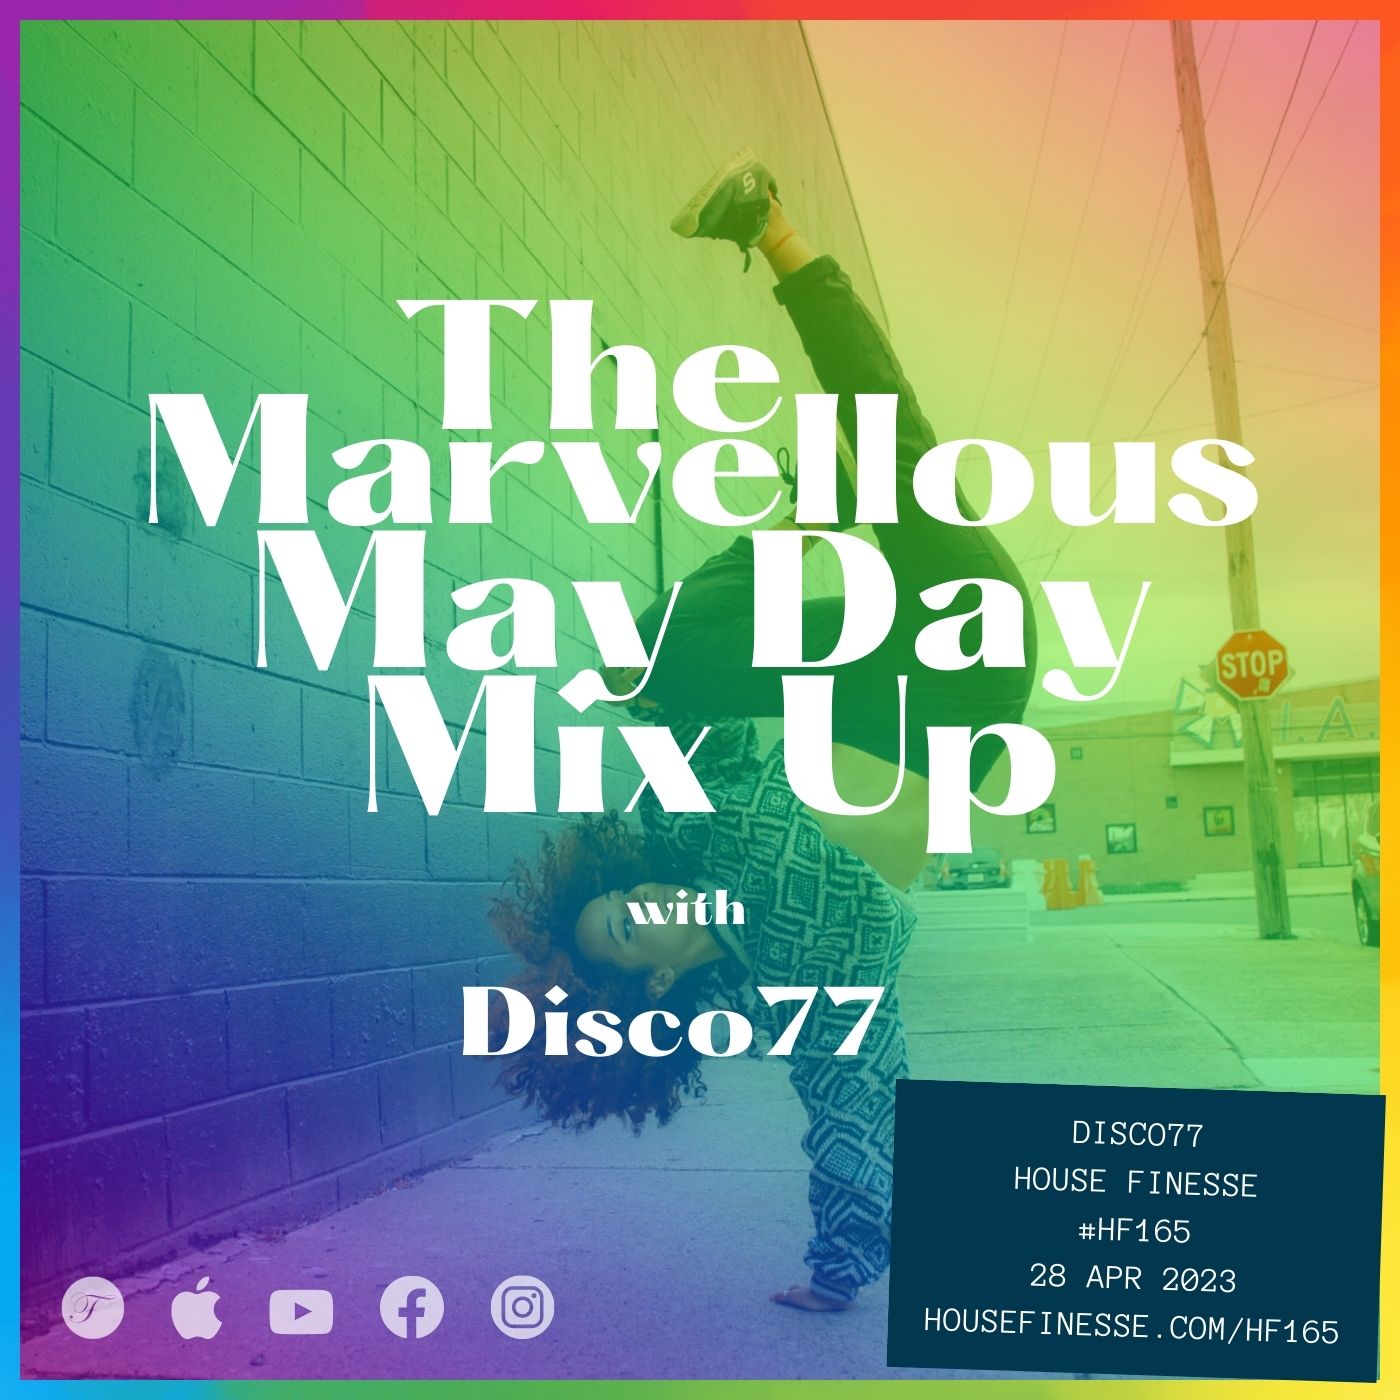 The Marvellous May Day Mix Up with Disco77